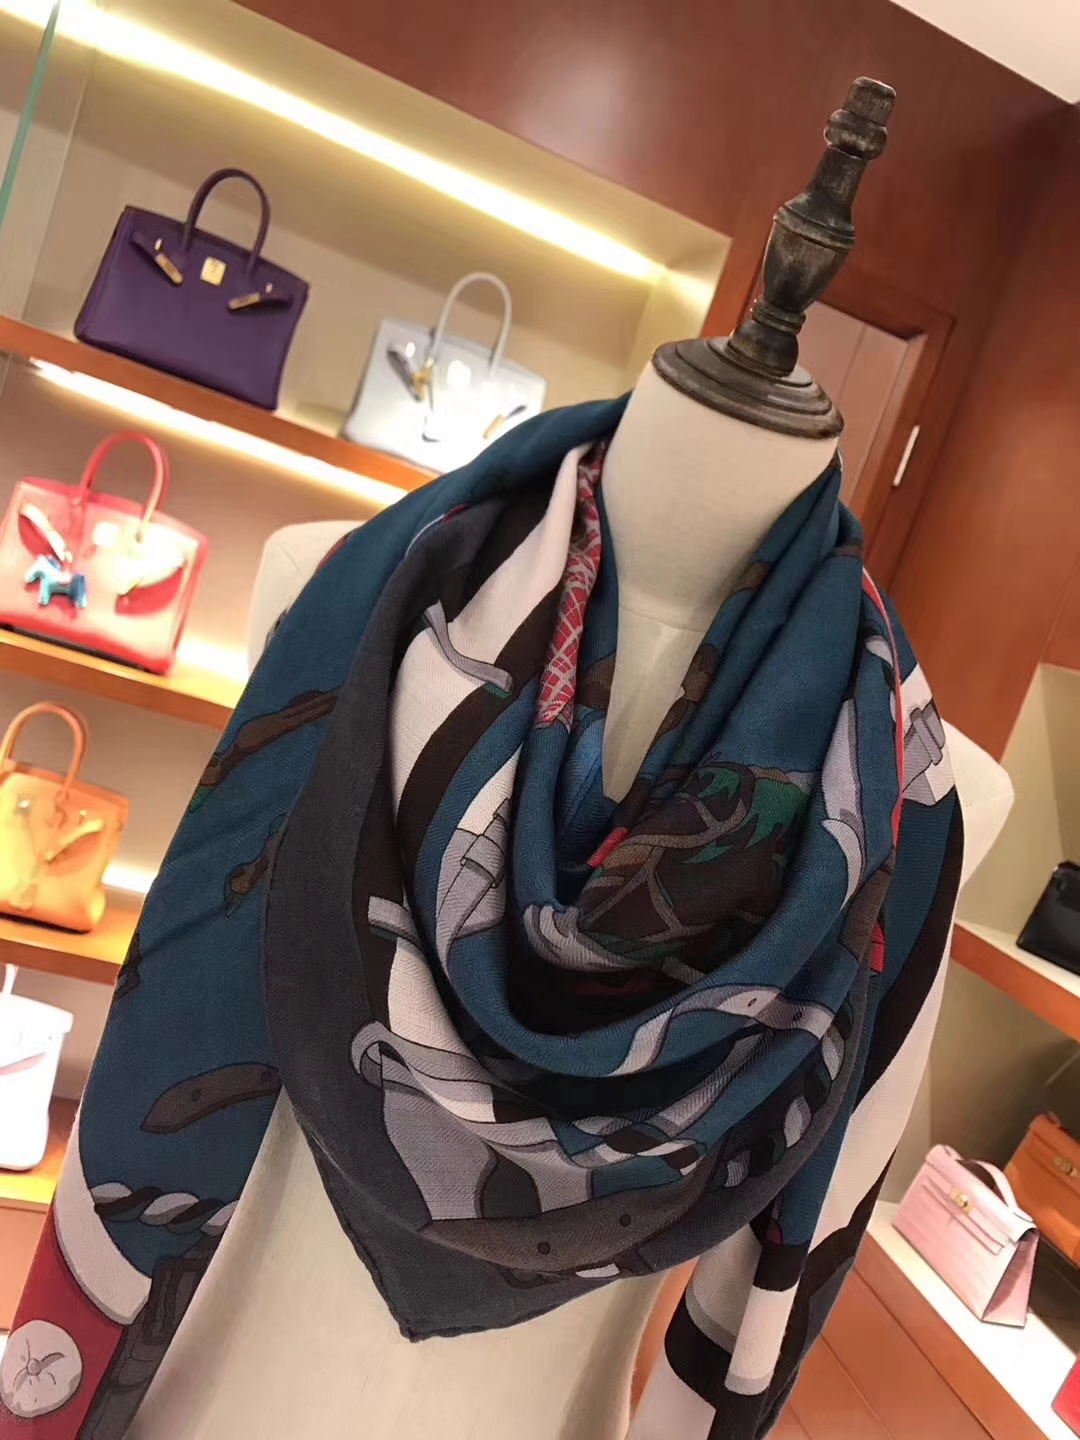 High Quality Hermes Cashmere Scarf Cape in Navy Blue 140*140cm Complete Package